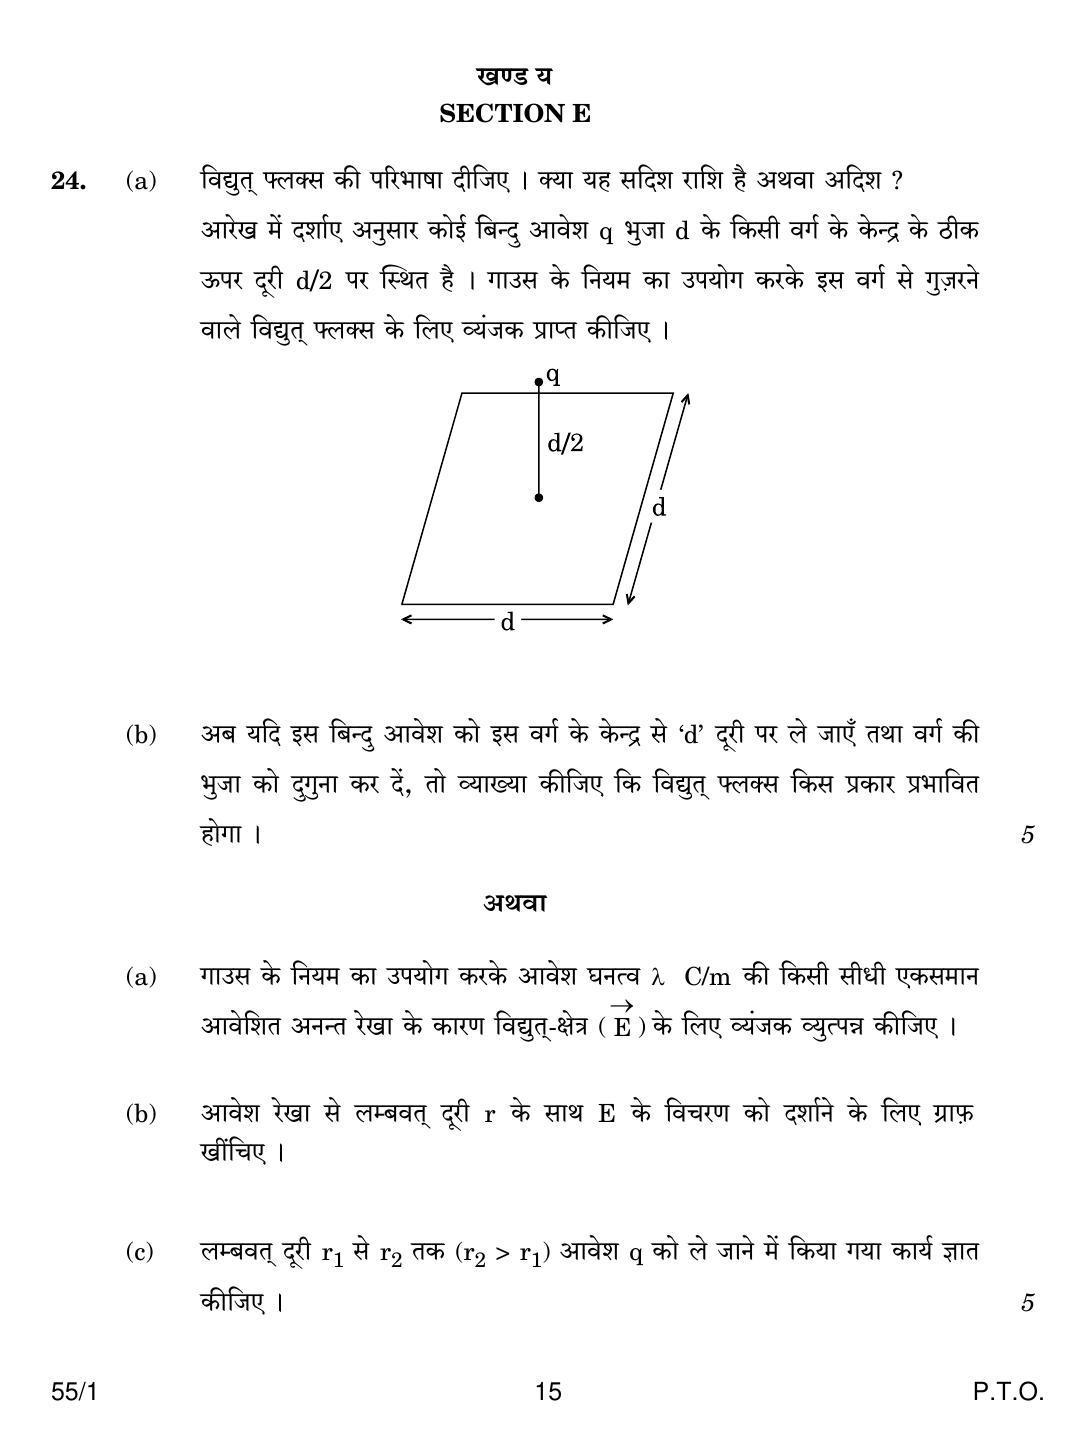 CBSE Class 12 55-1 PHYSICS 2018 Question Paper - Page 15